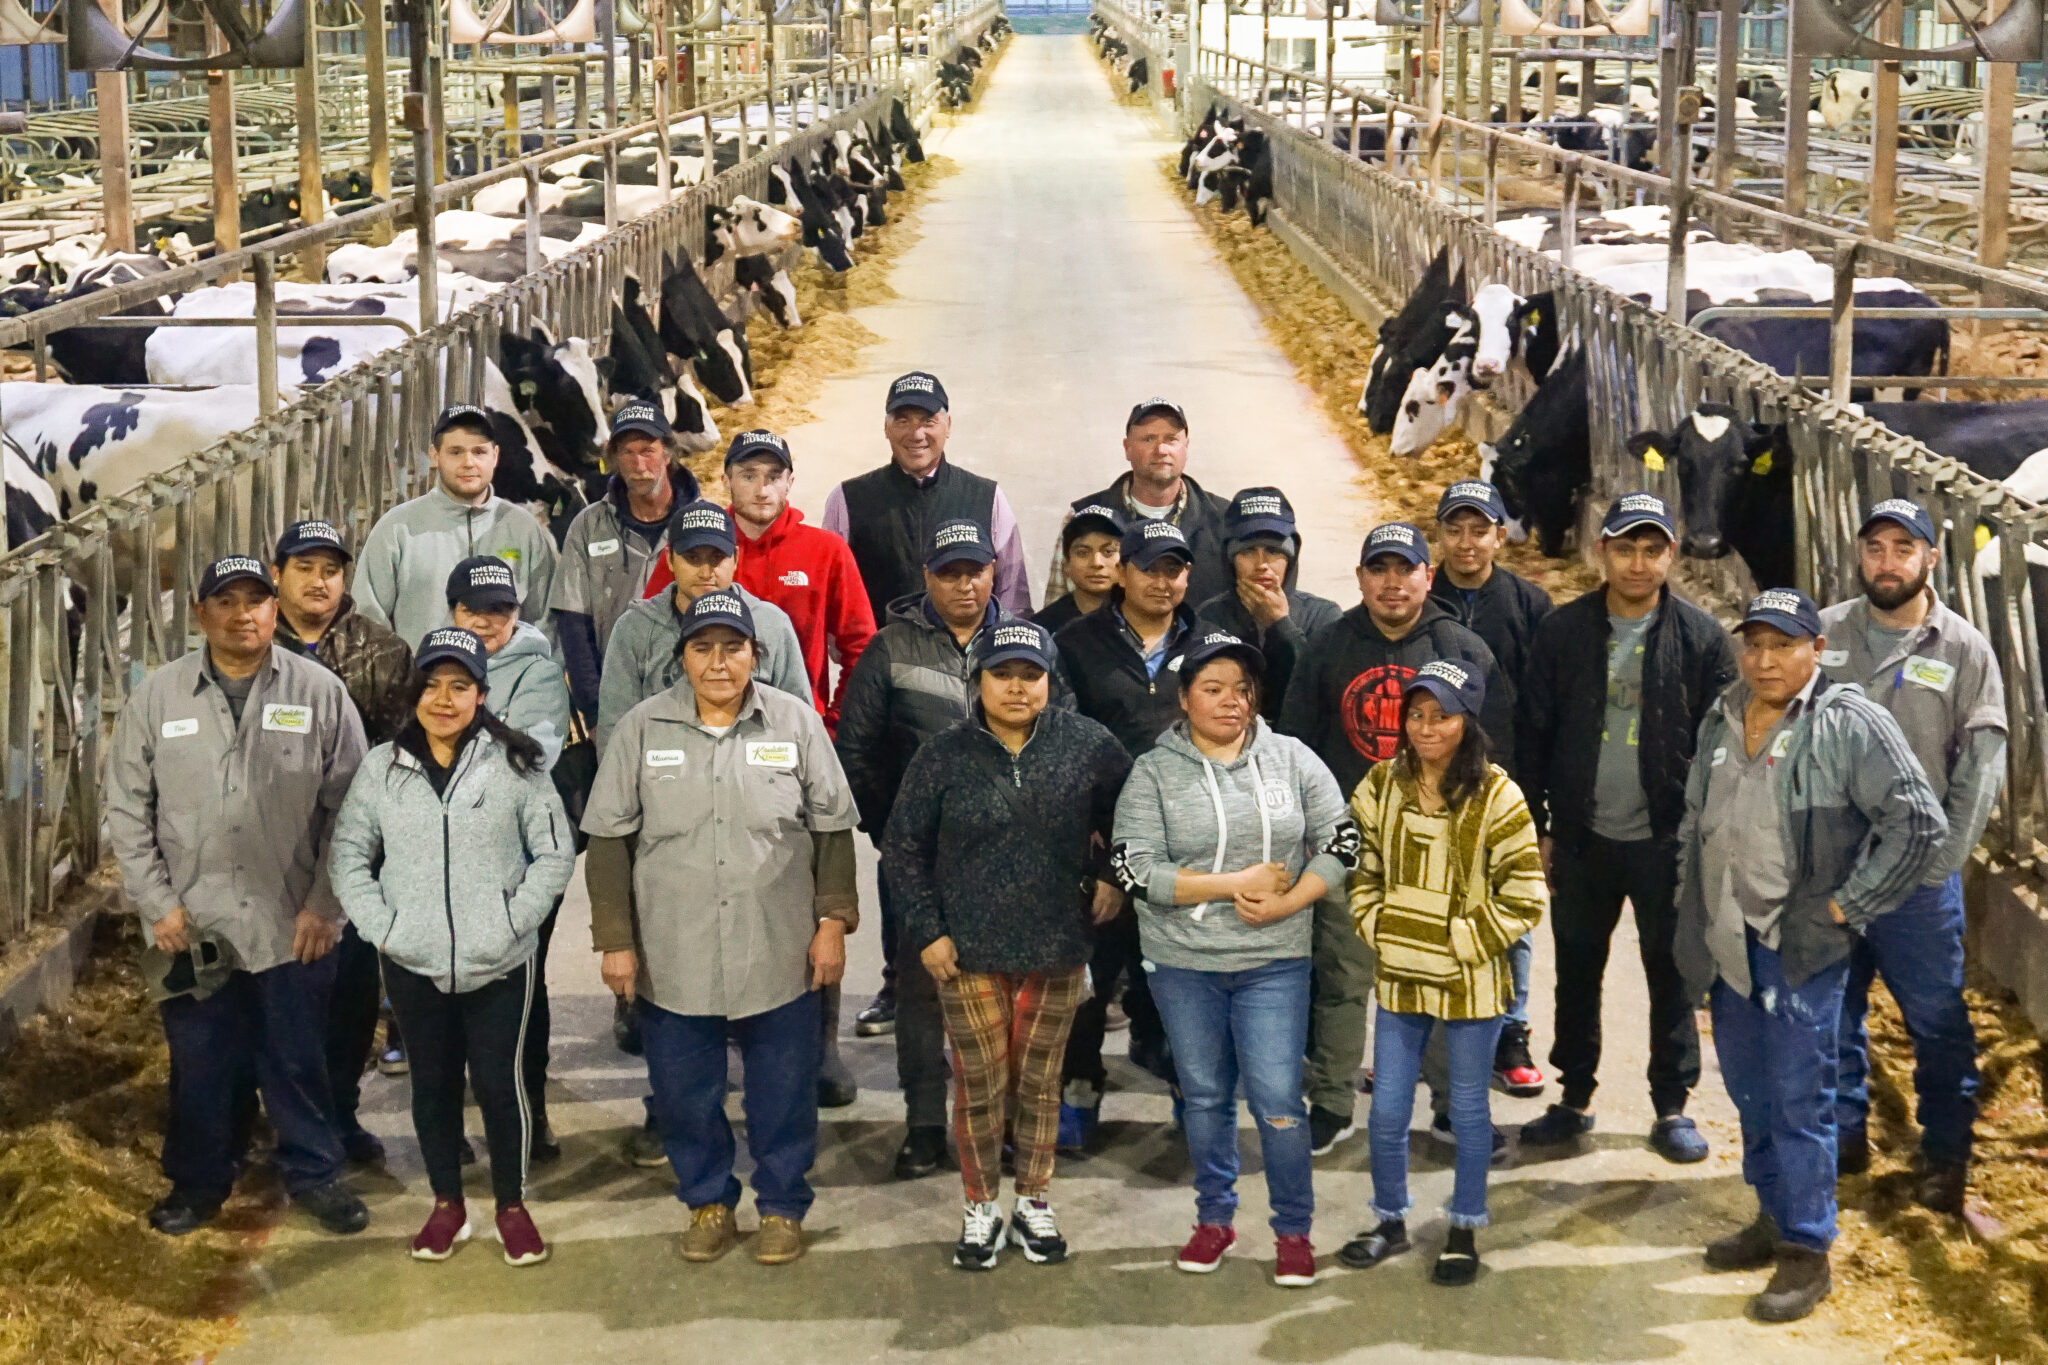 Kreider Farms First American Humane Certified Dairy in the